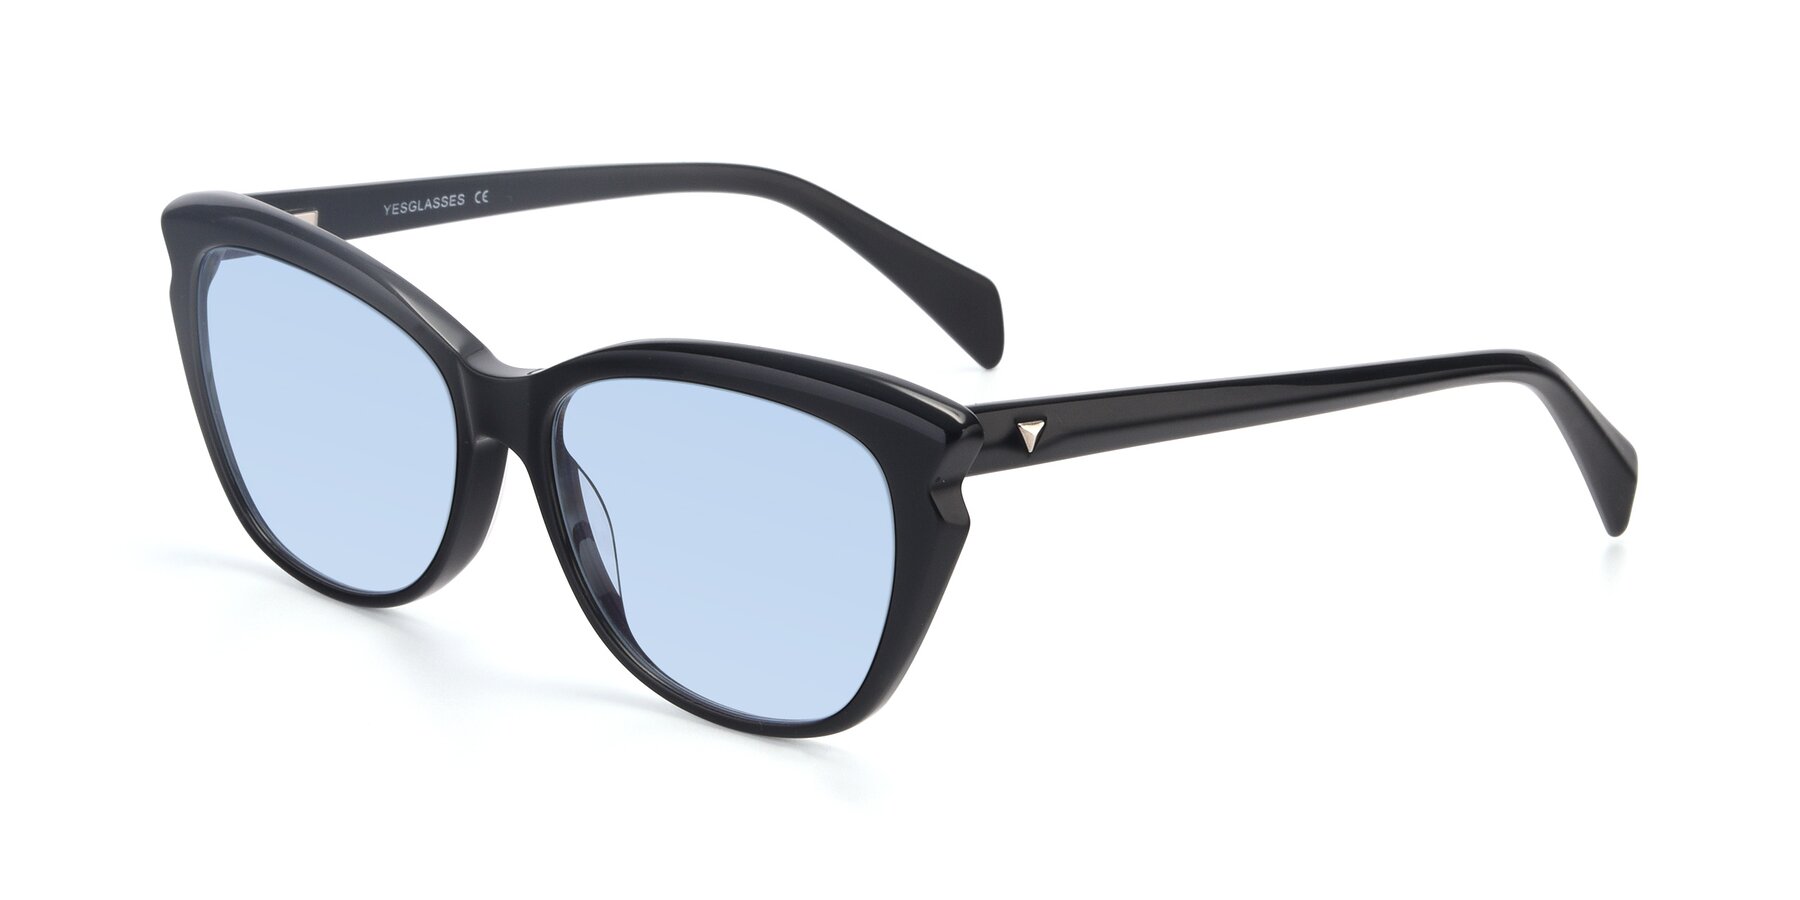 Angle of 17629 in Black with Light Blue Tinted Lenses